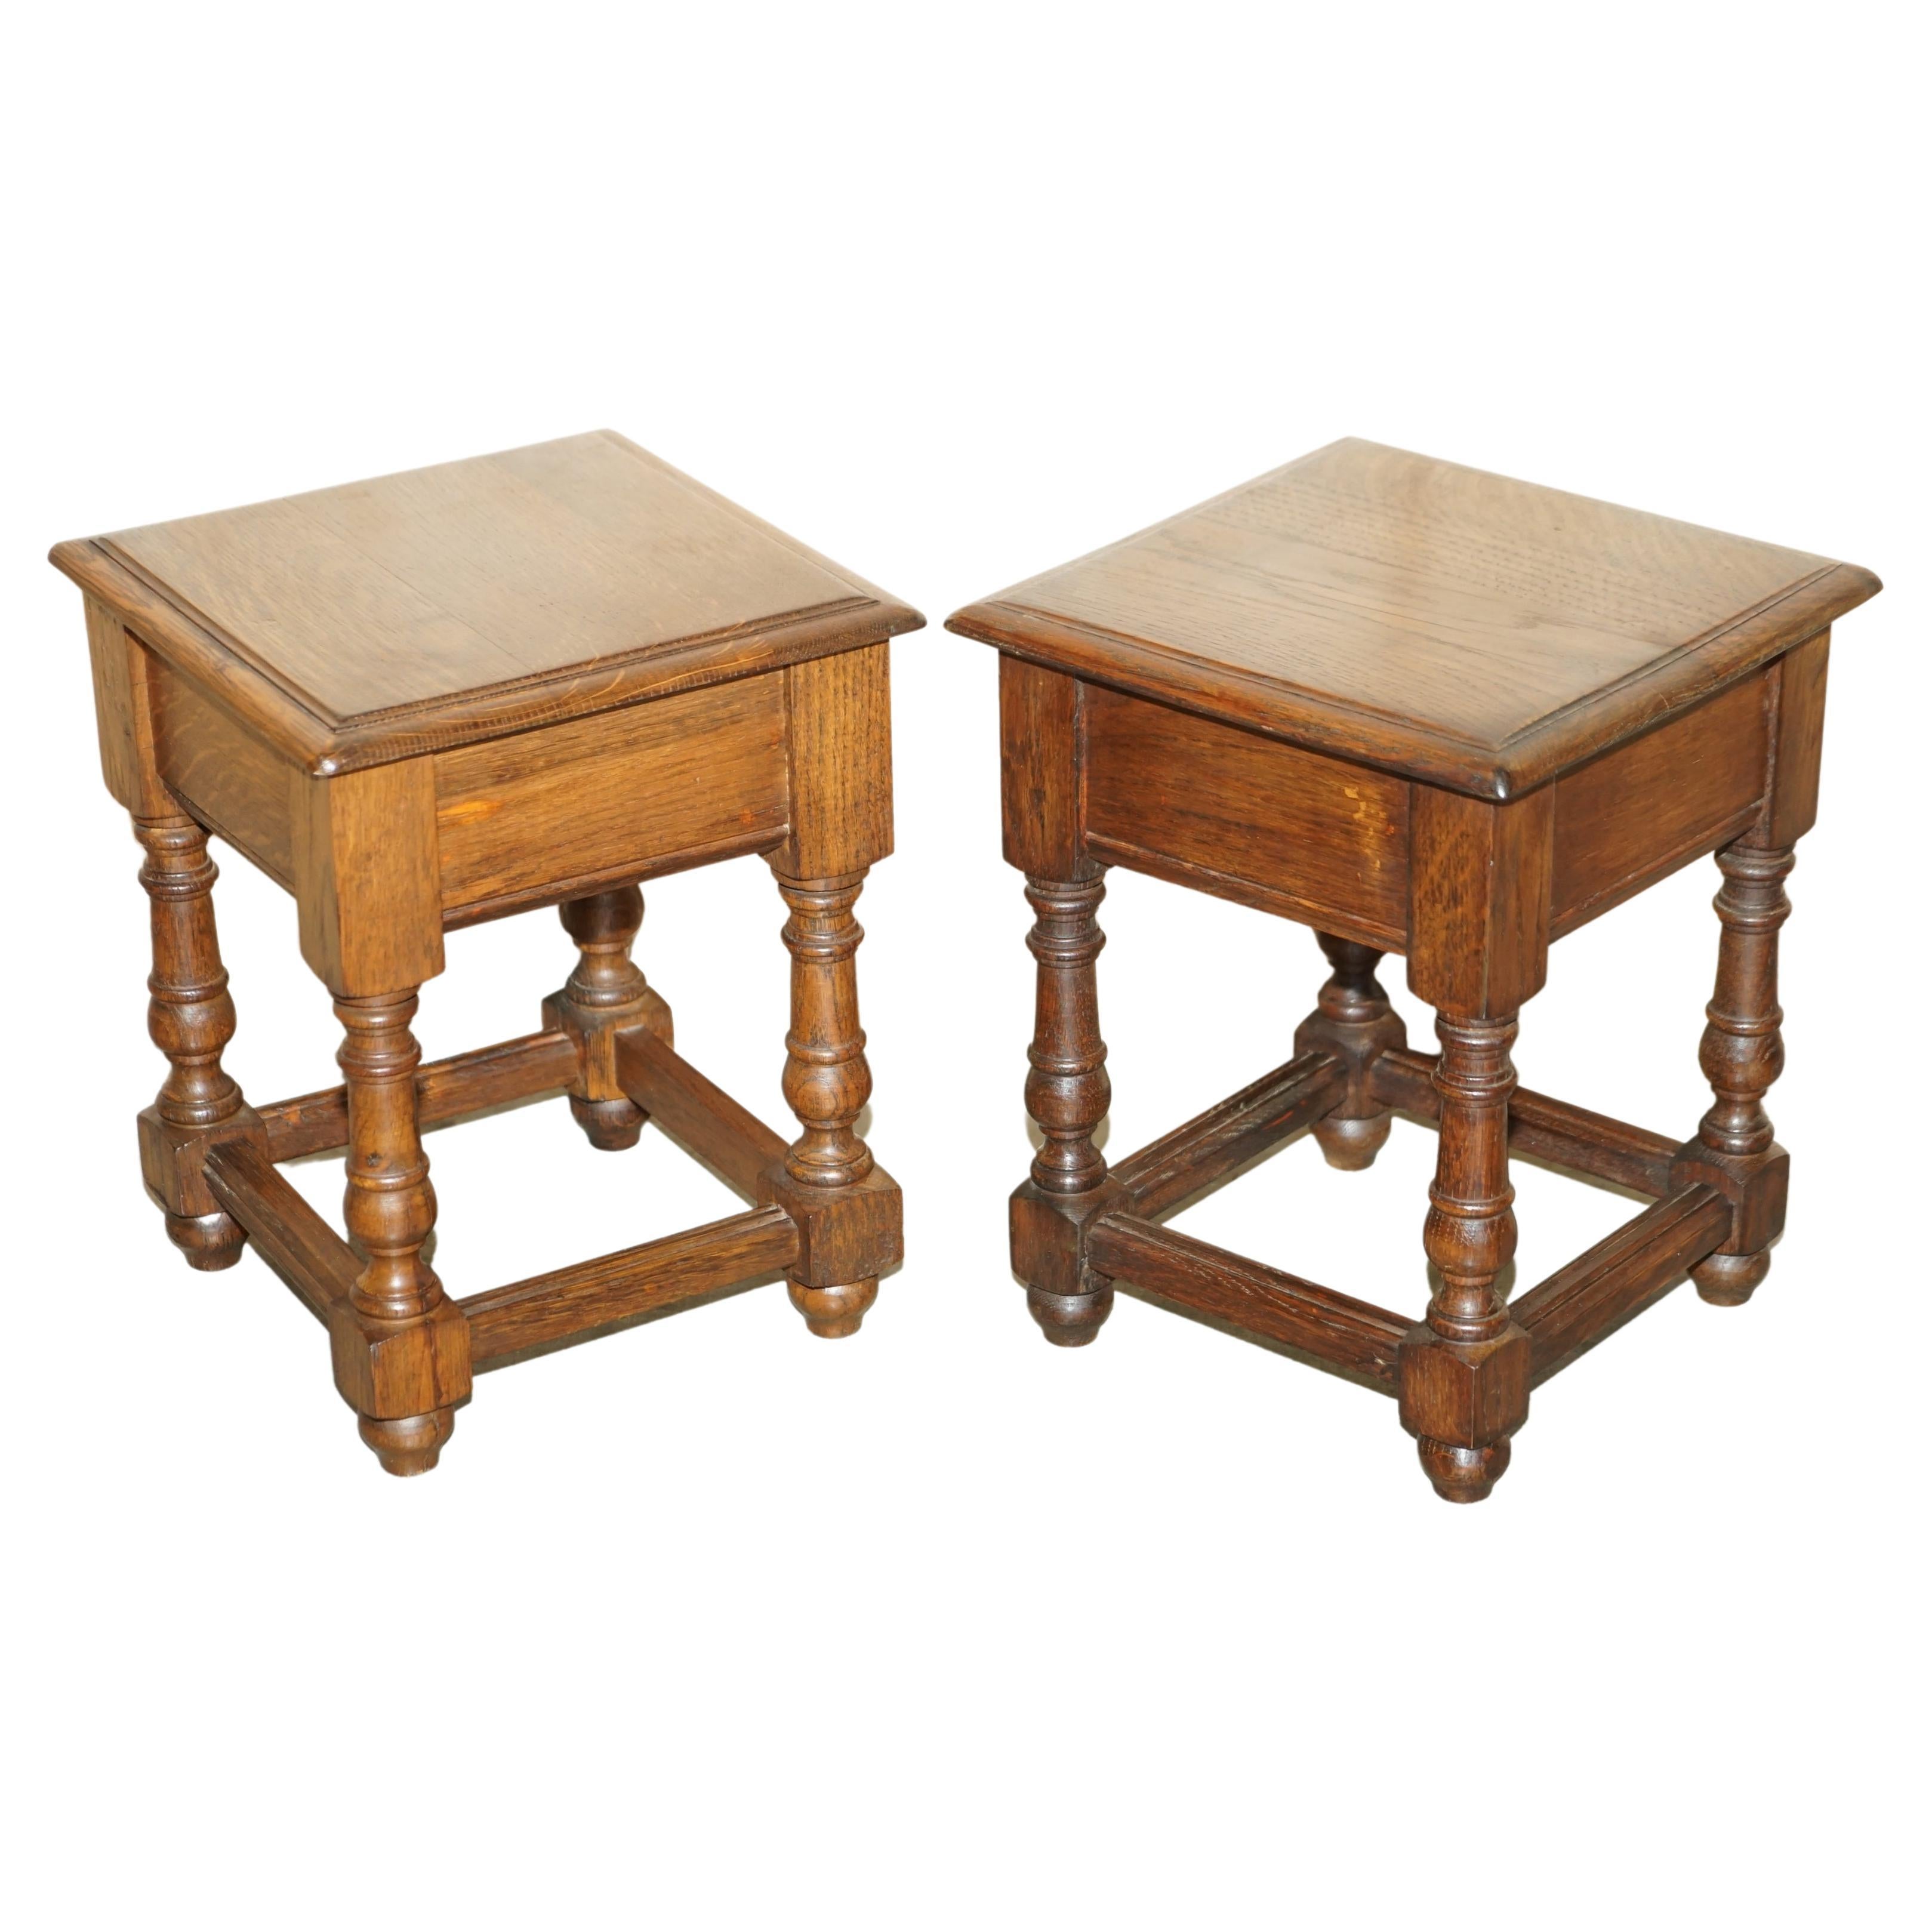 Pair of English Oak circa 1900 Late Victorian / Early Edwardian Side Lamp Tables